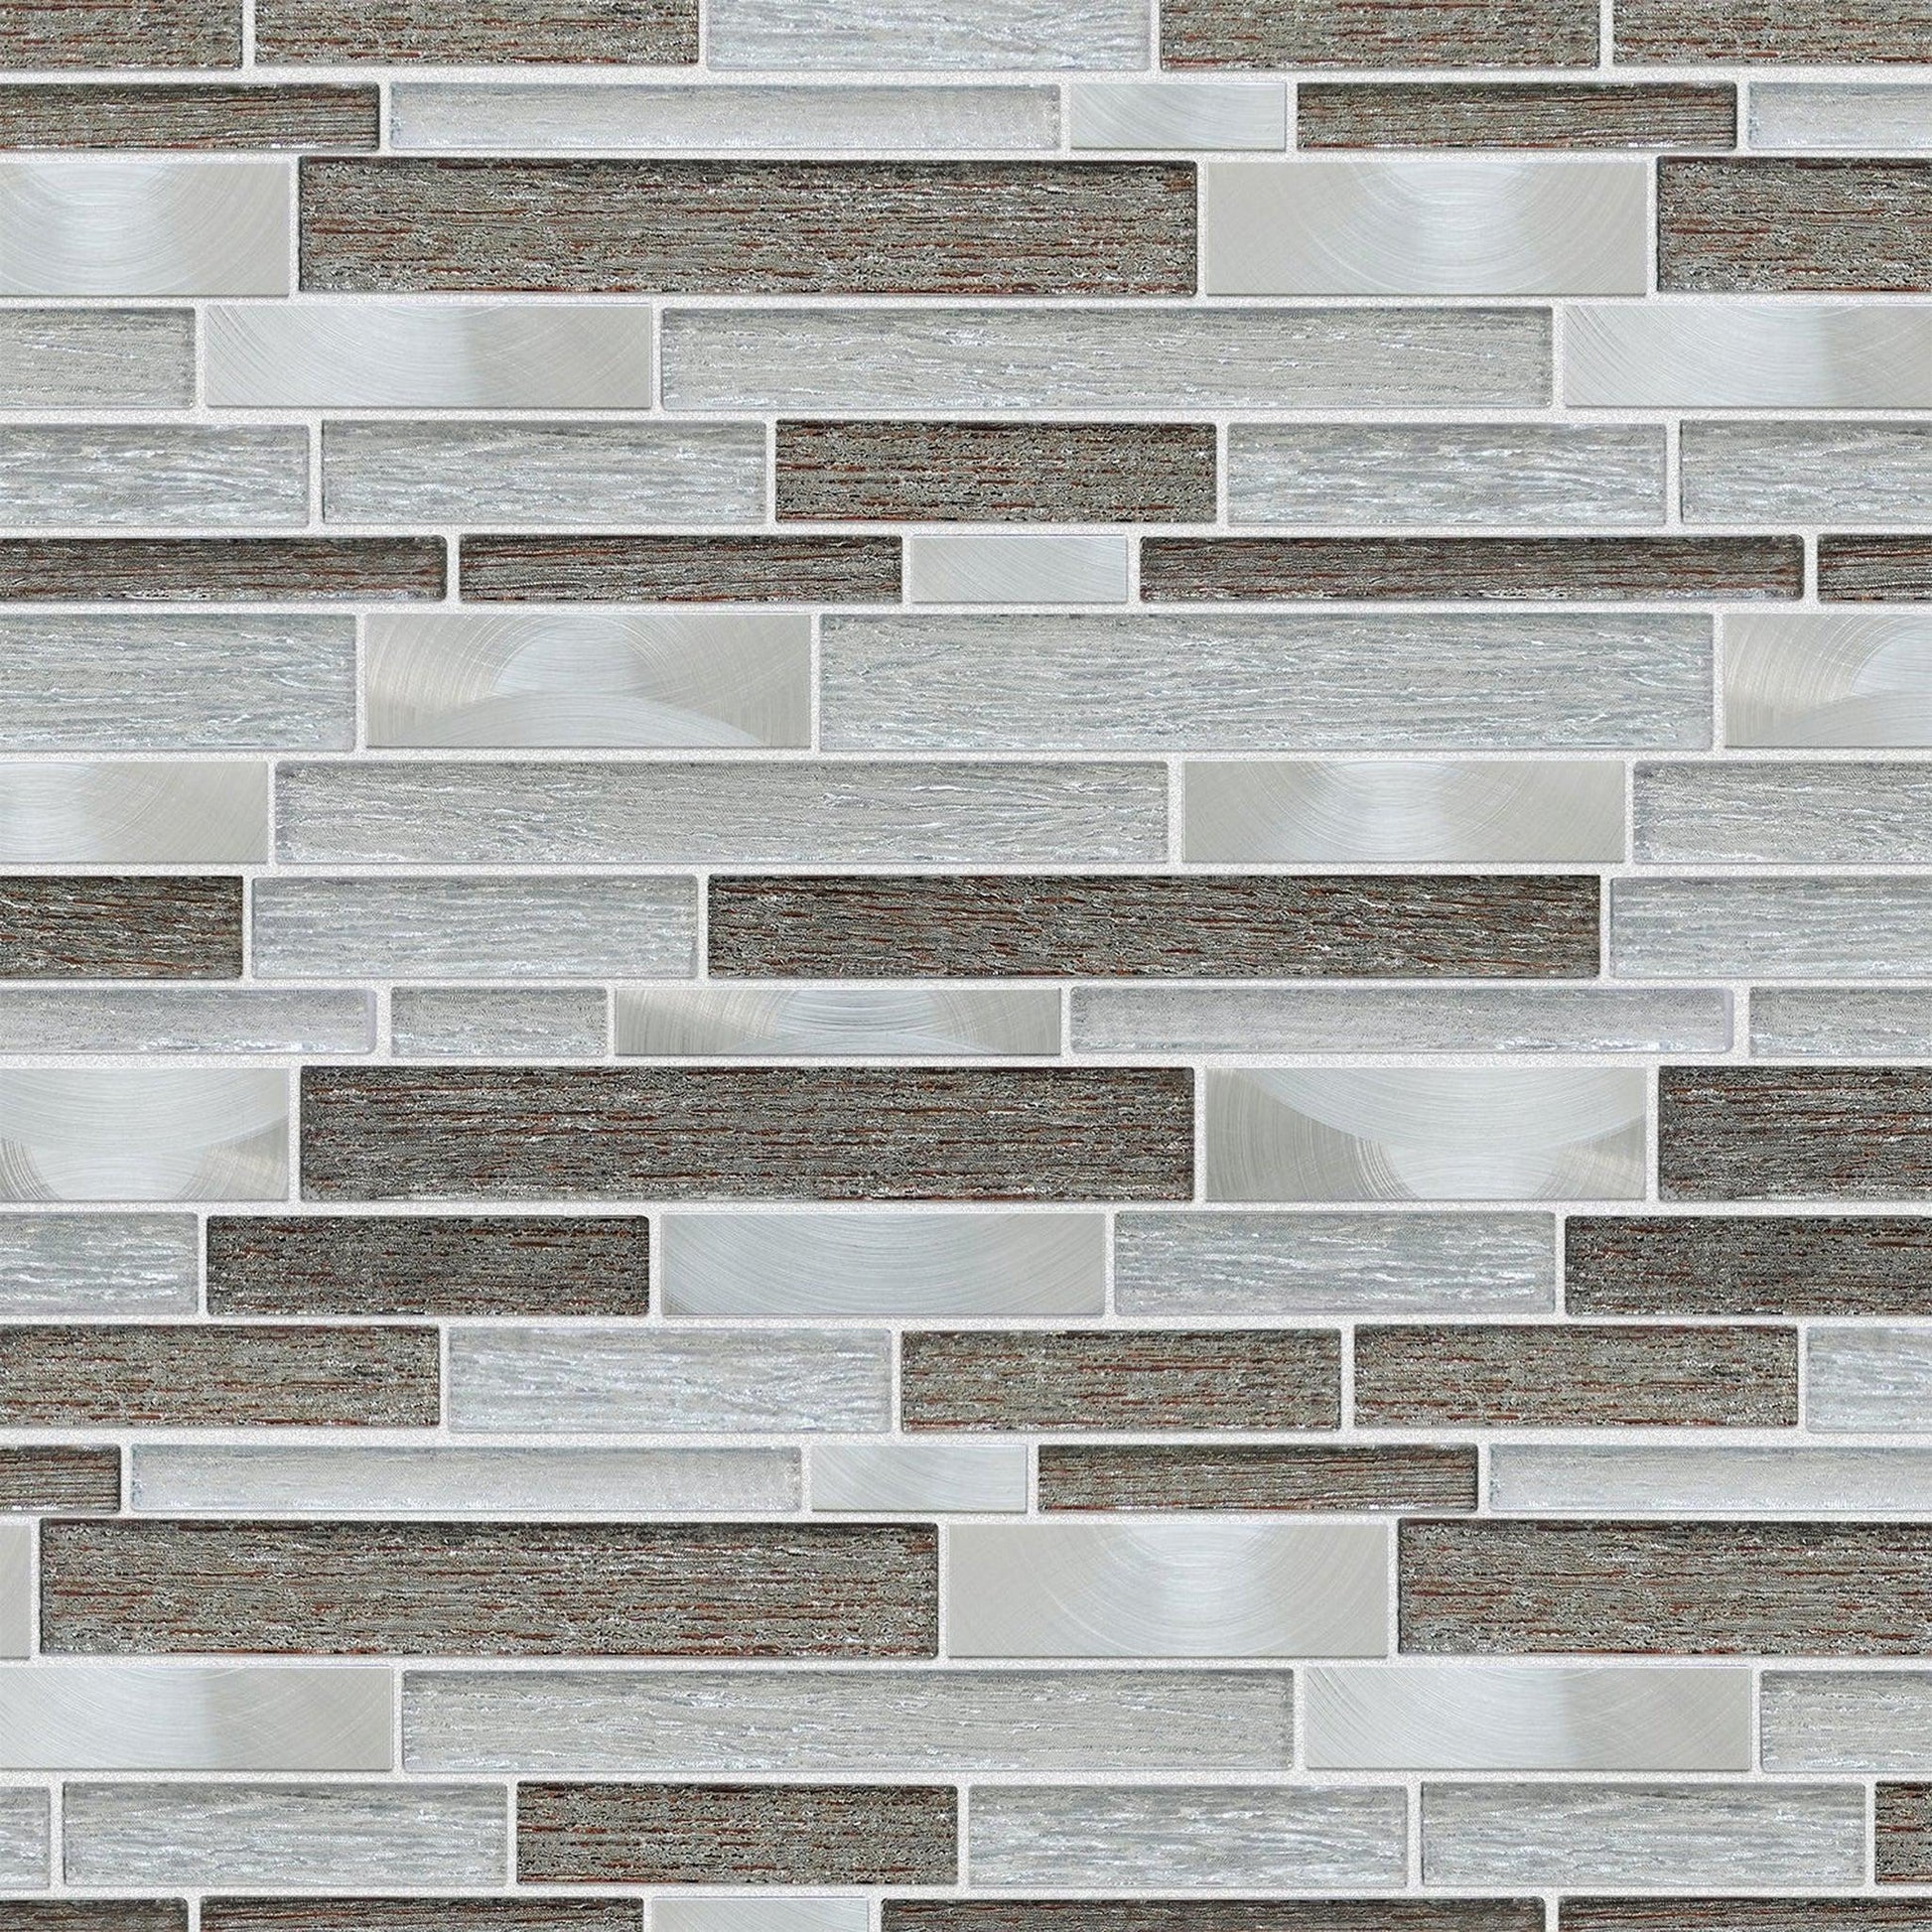 Altair Glena 15 pcs. Linear Mixed Color Glass Mosaic Wall Tile